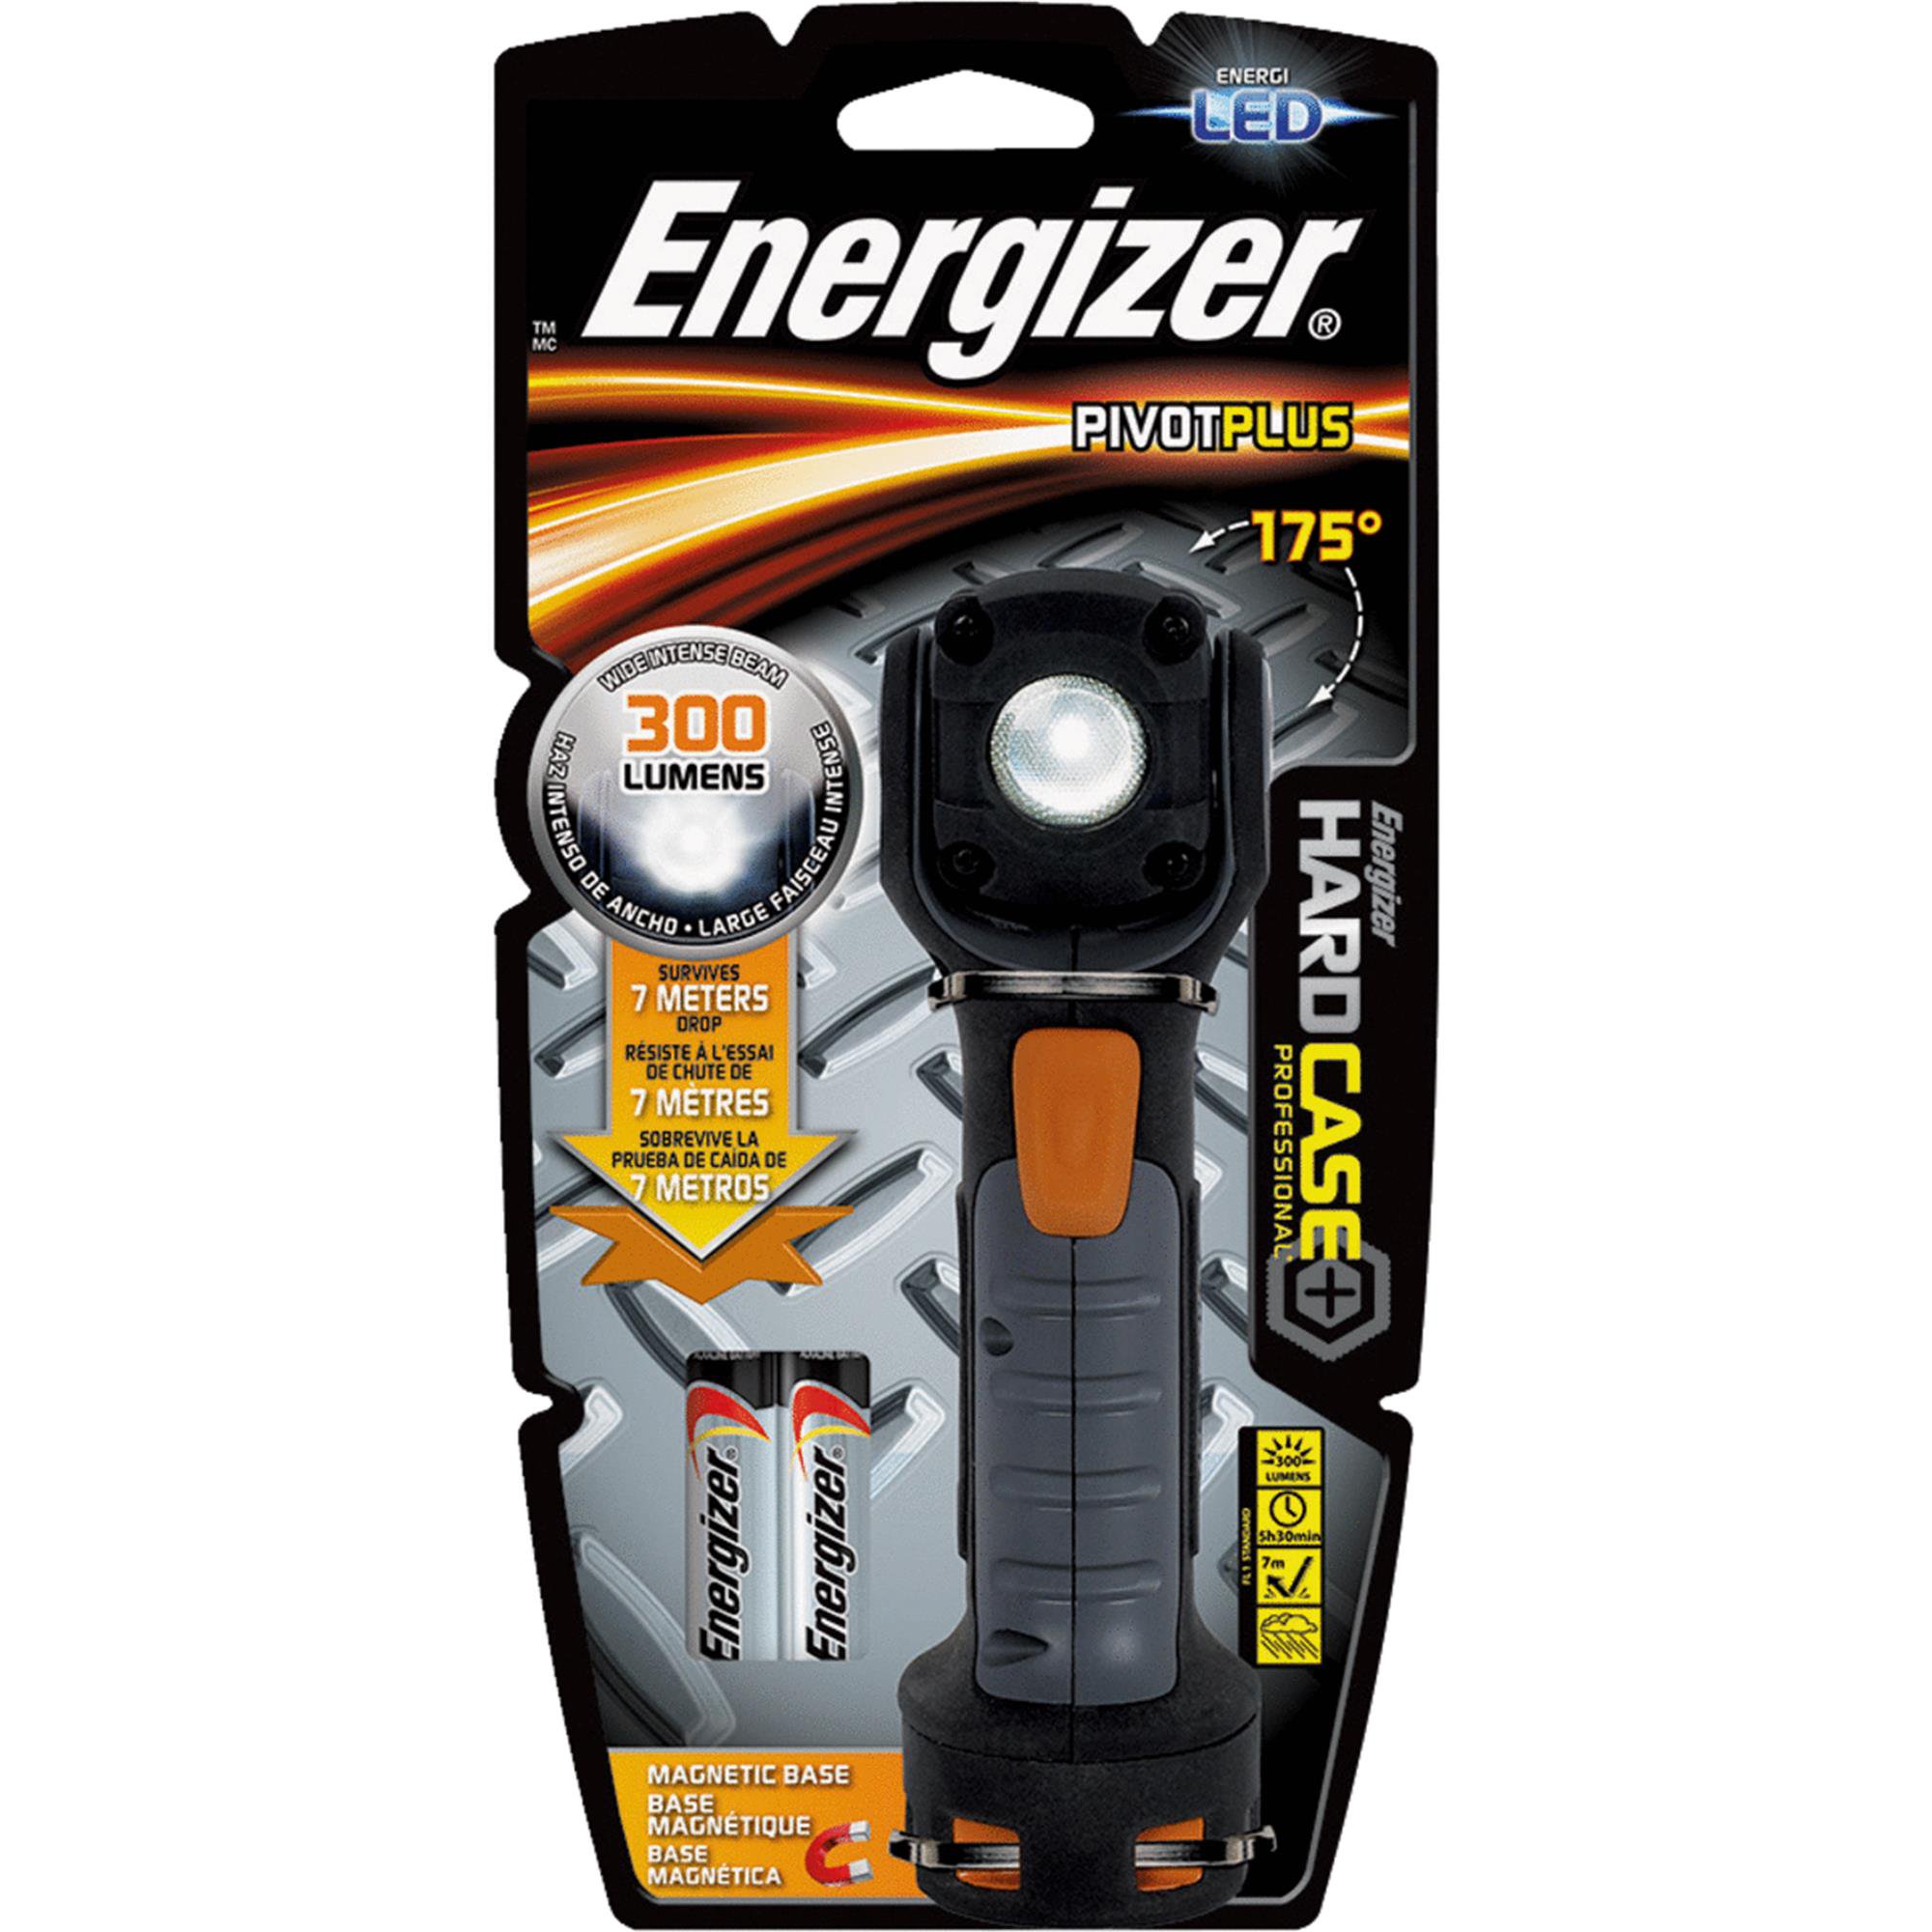 Energizer LED AA Work Light, Hard Case Professional PivotPlus Light, Hour  Run Time, 300 Lumens (Batteries Included)